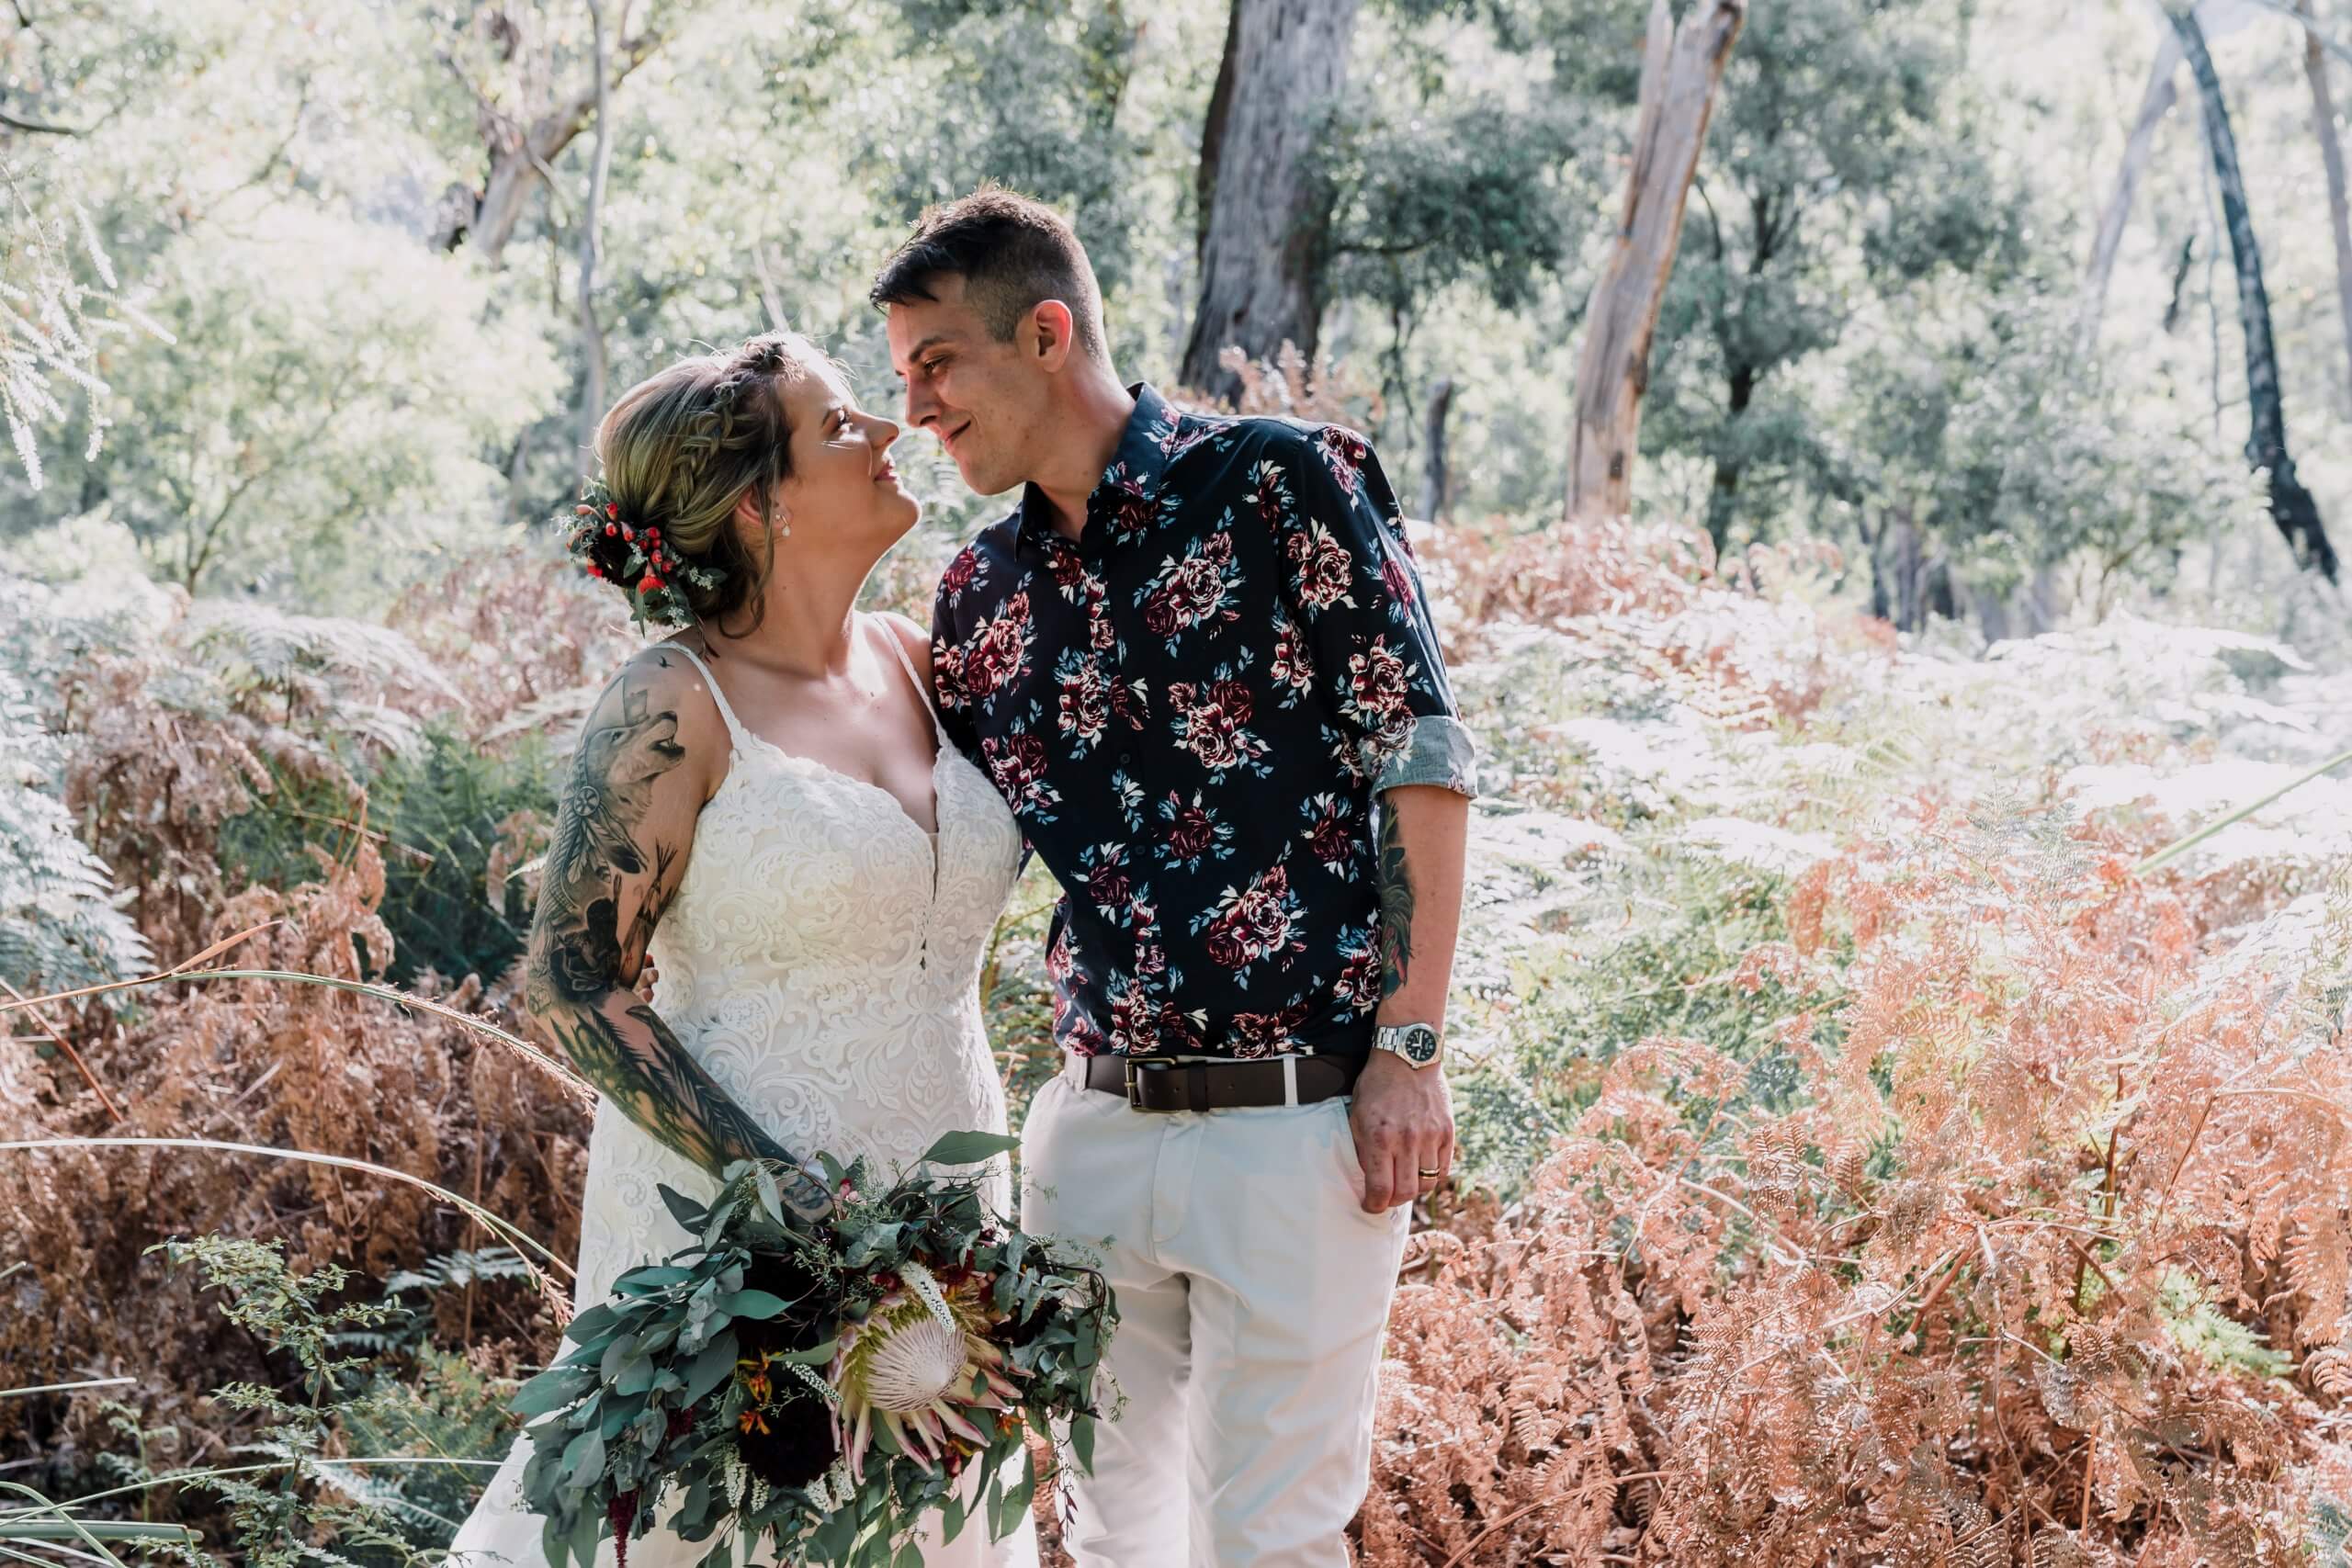 Newlyweds looking in love while holding each other in this beautiful location in the halls gap, captured by Black Avenue Productions